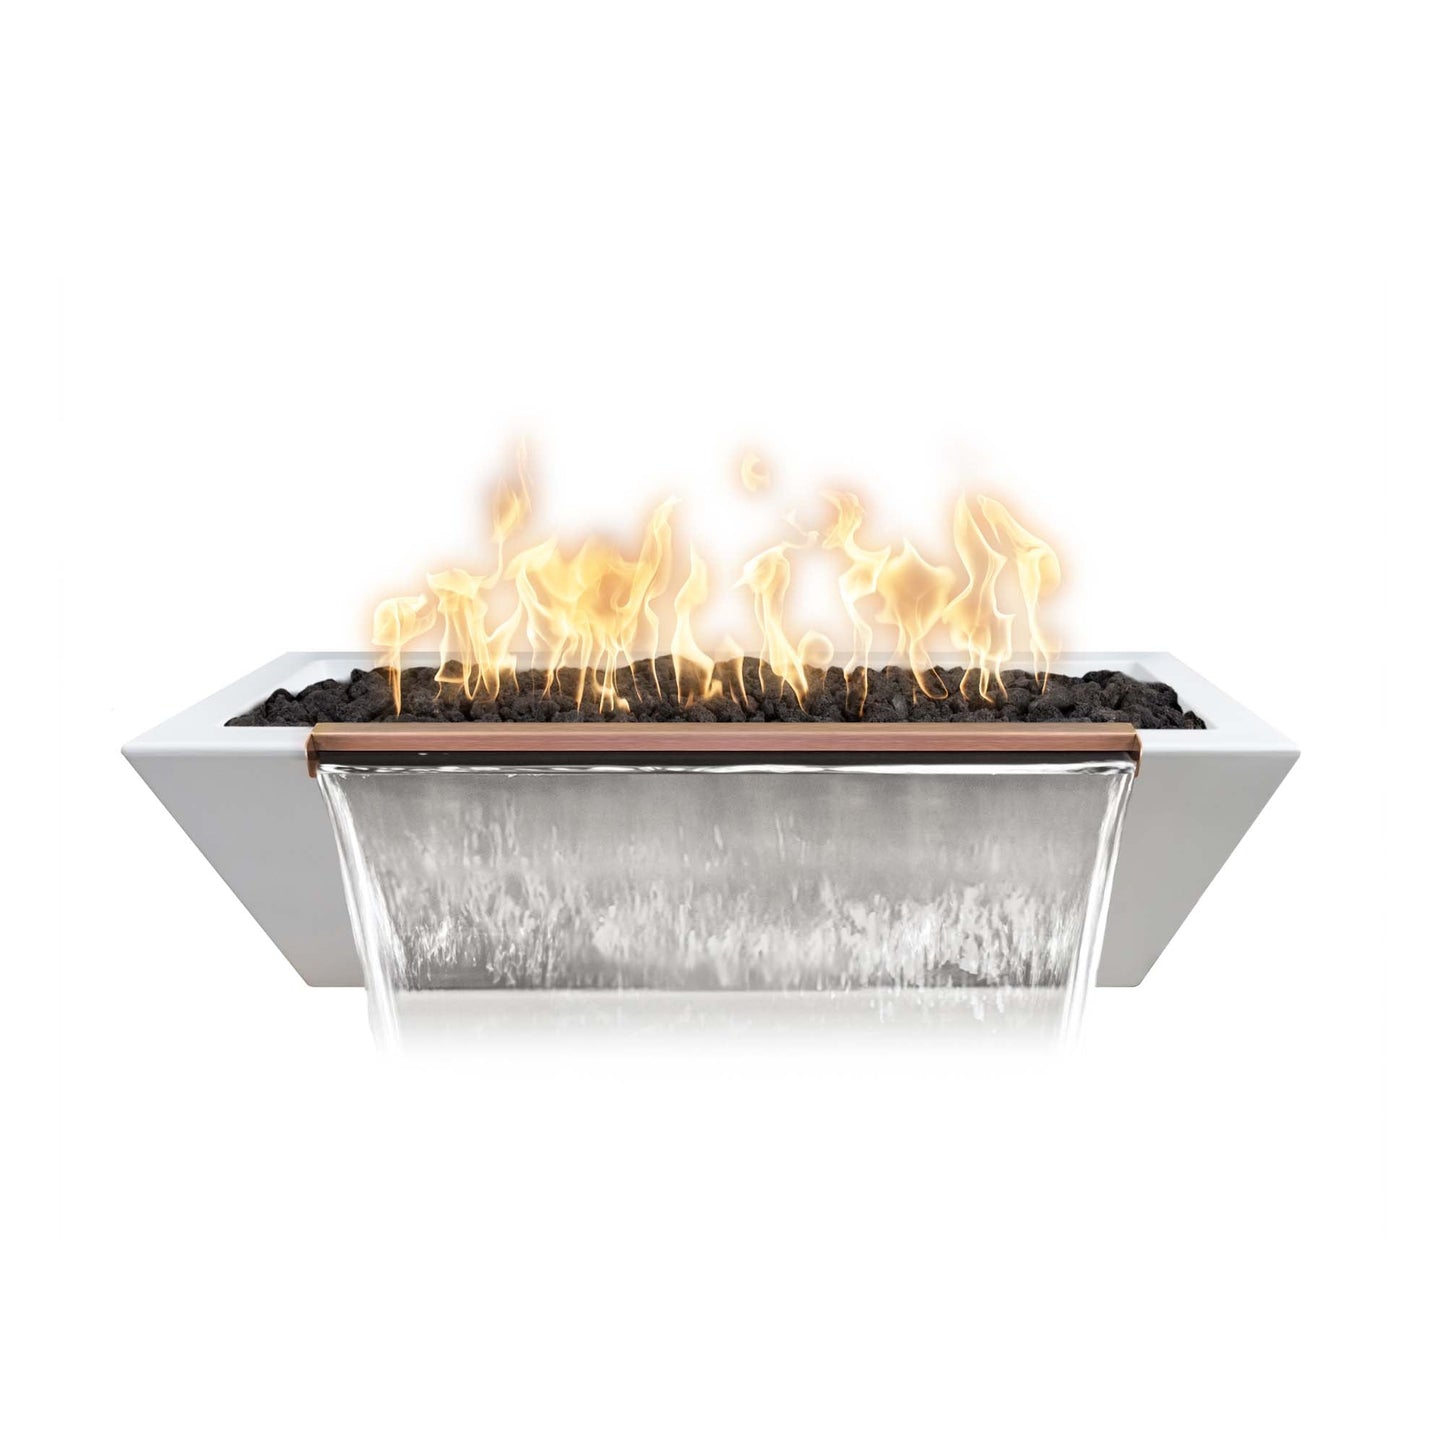 The Outdoor Plus Linear Maya 48" Metallic Bronze GFRC Concrete Natural Gas Fire & Water Bowl with Match Lit with Flame Sense Ignition